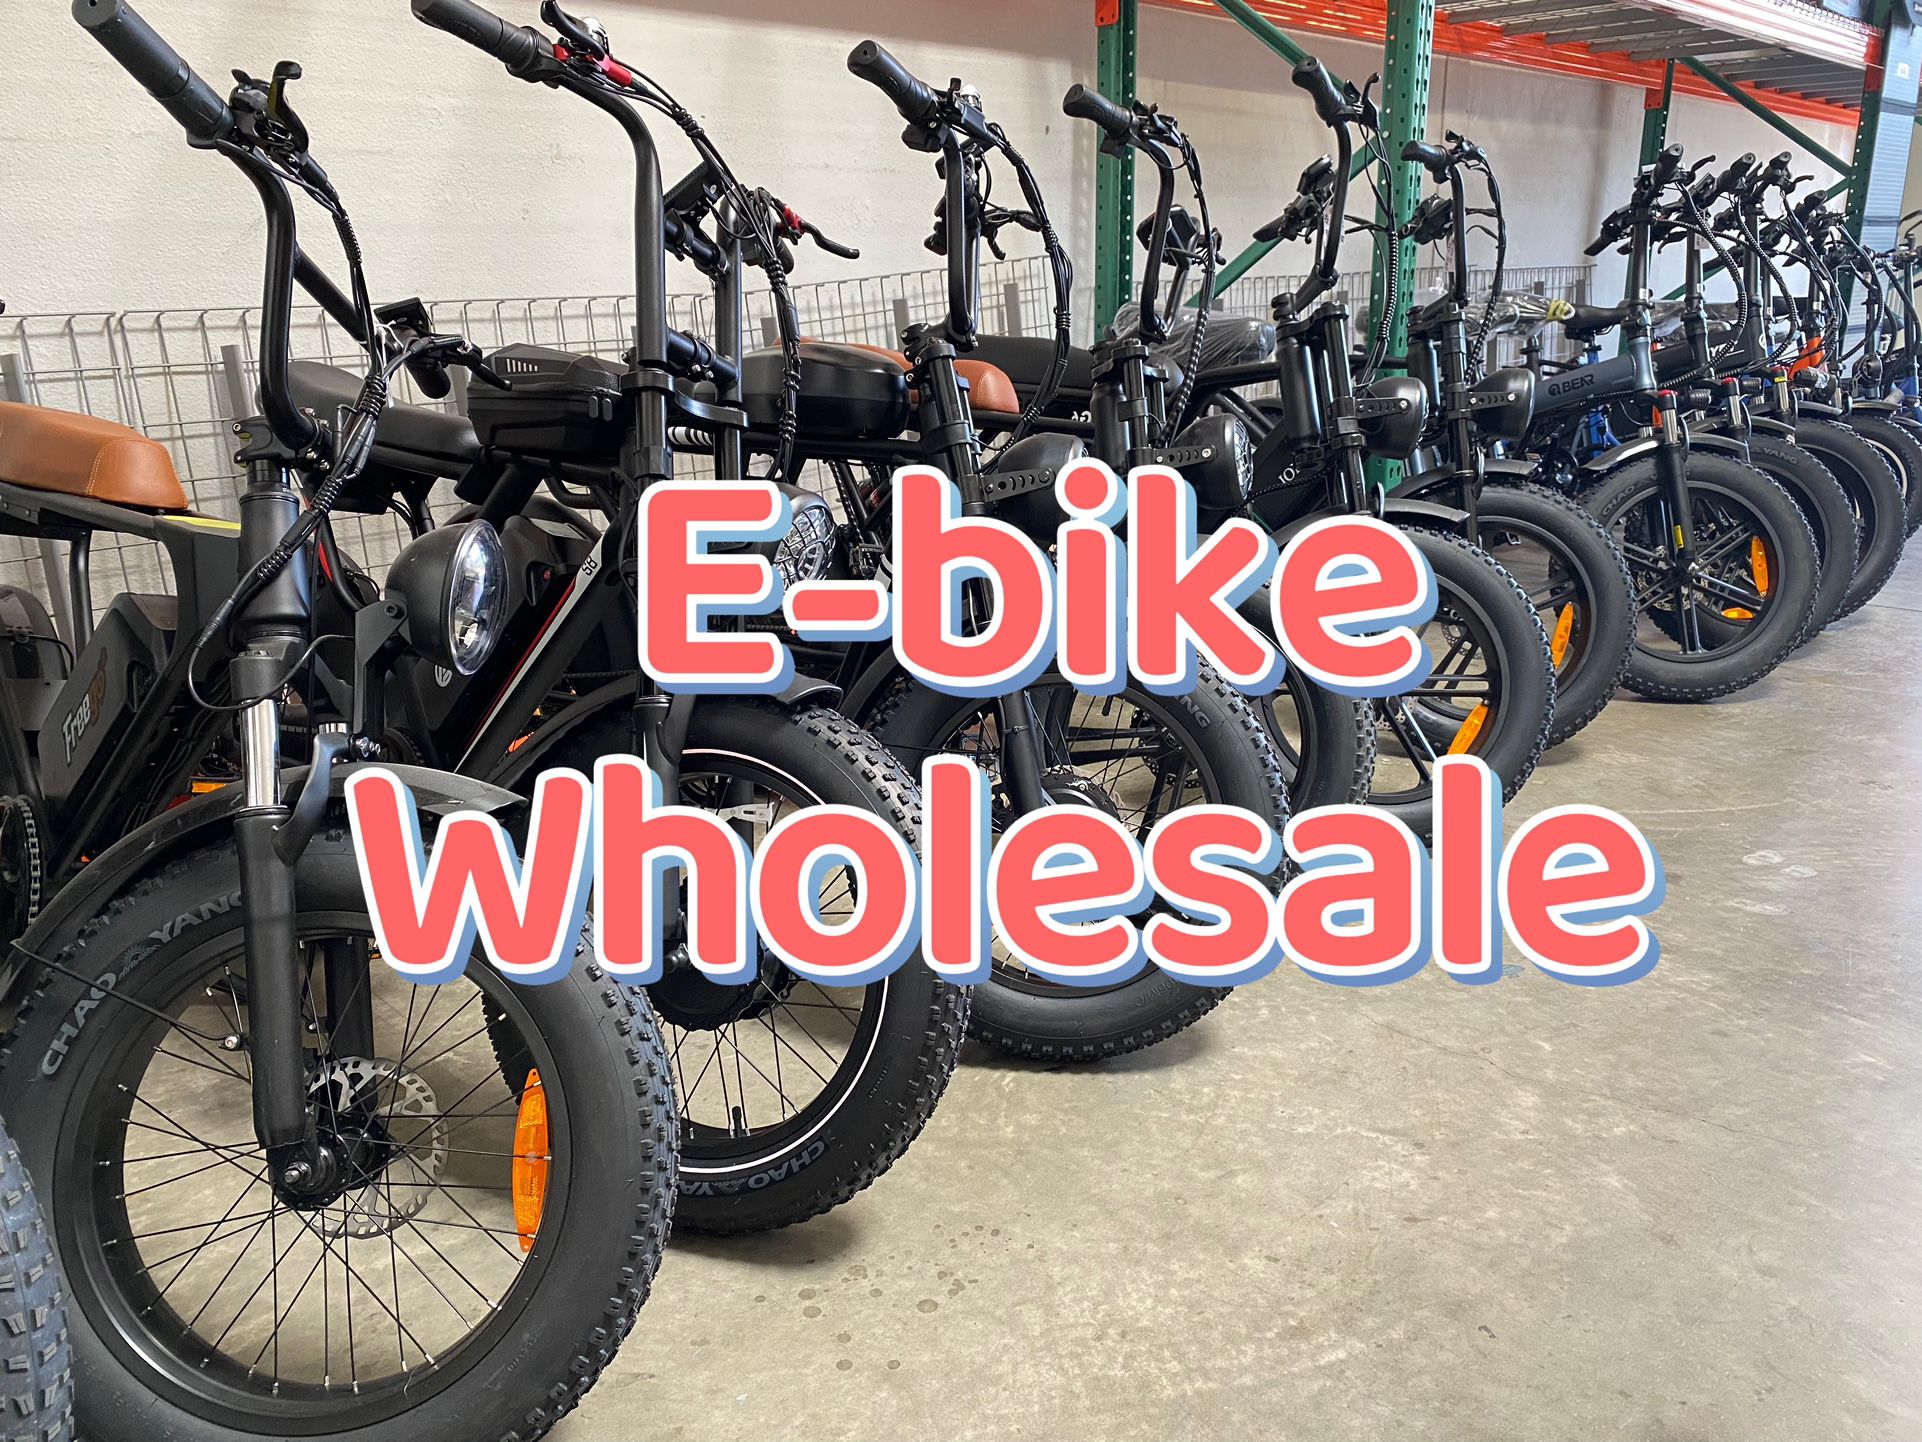 Wholesale available For Bulk Buy, 20 & More Models In Stock (mini, retro, moped, step through, foldable, dual motor, dual battery….) 